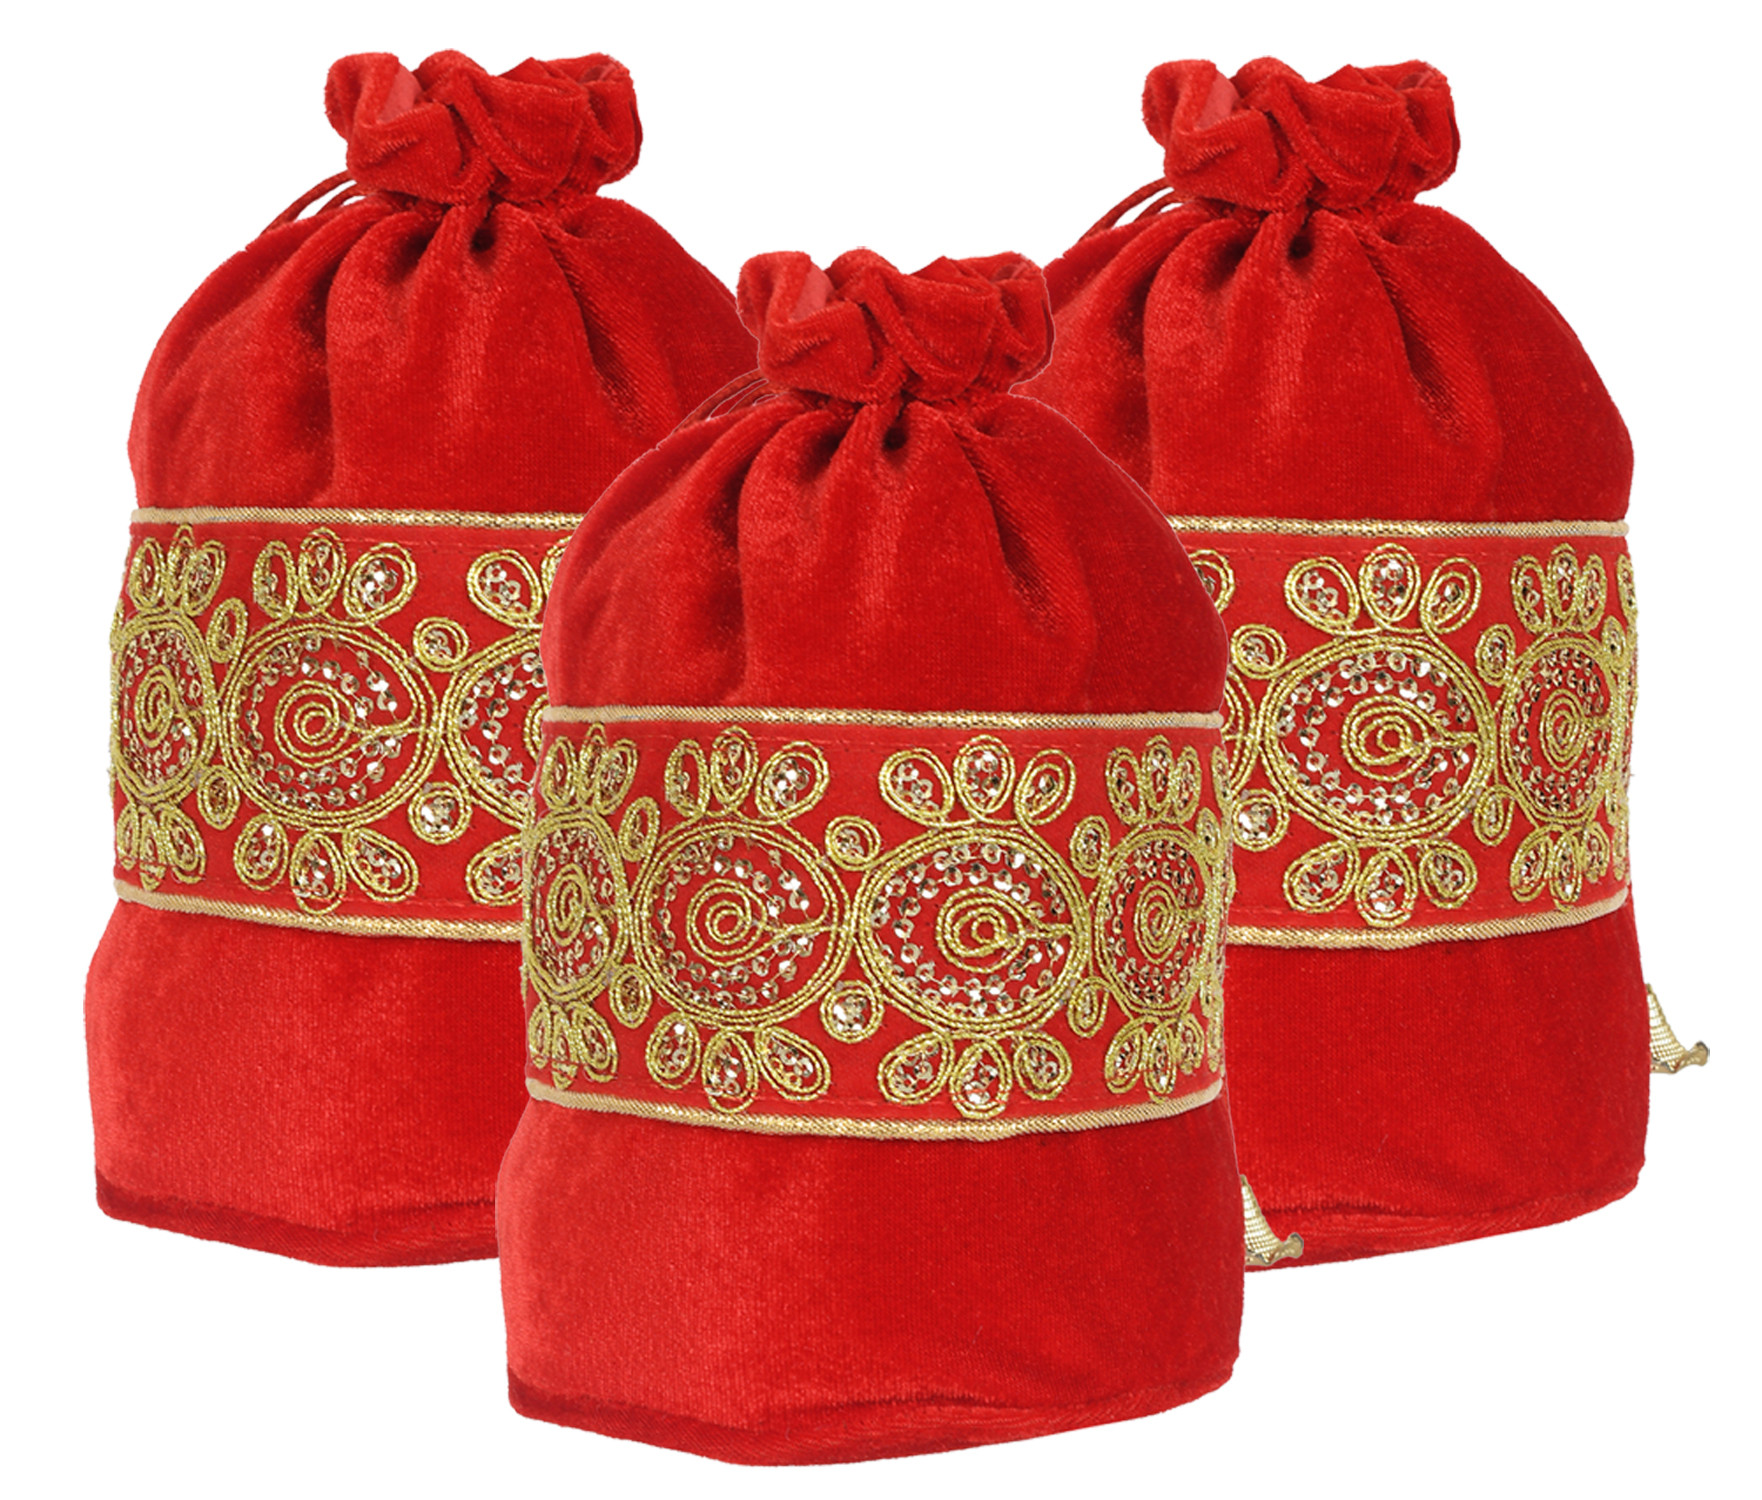 Kuber Industries Embroidered Design Drawstring Potli Bag Party Wedding Favor Gift Jewelry Bags-(Red)